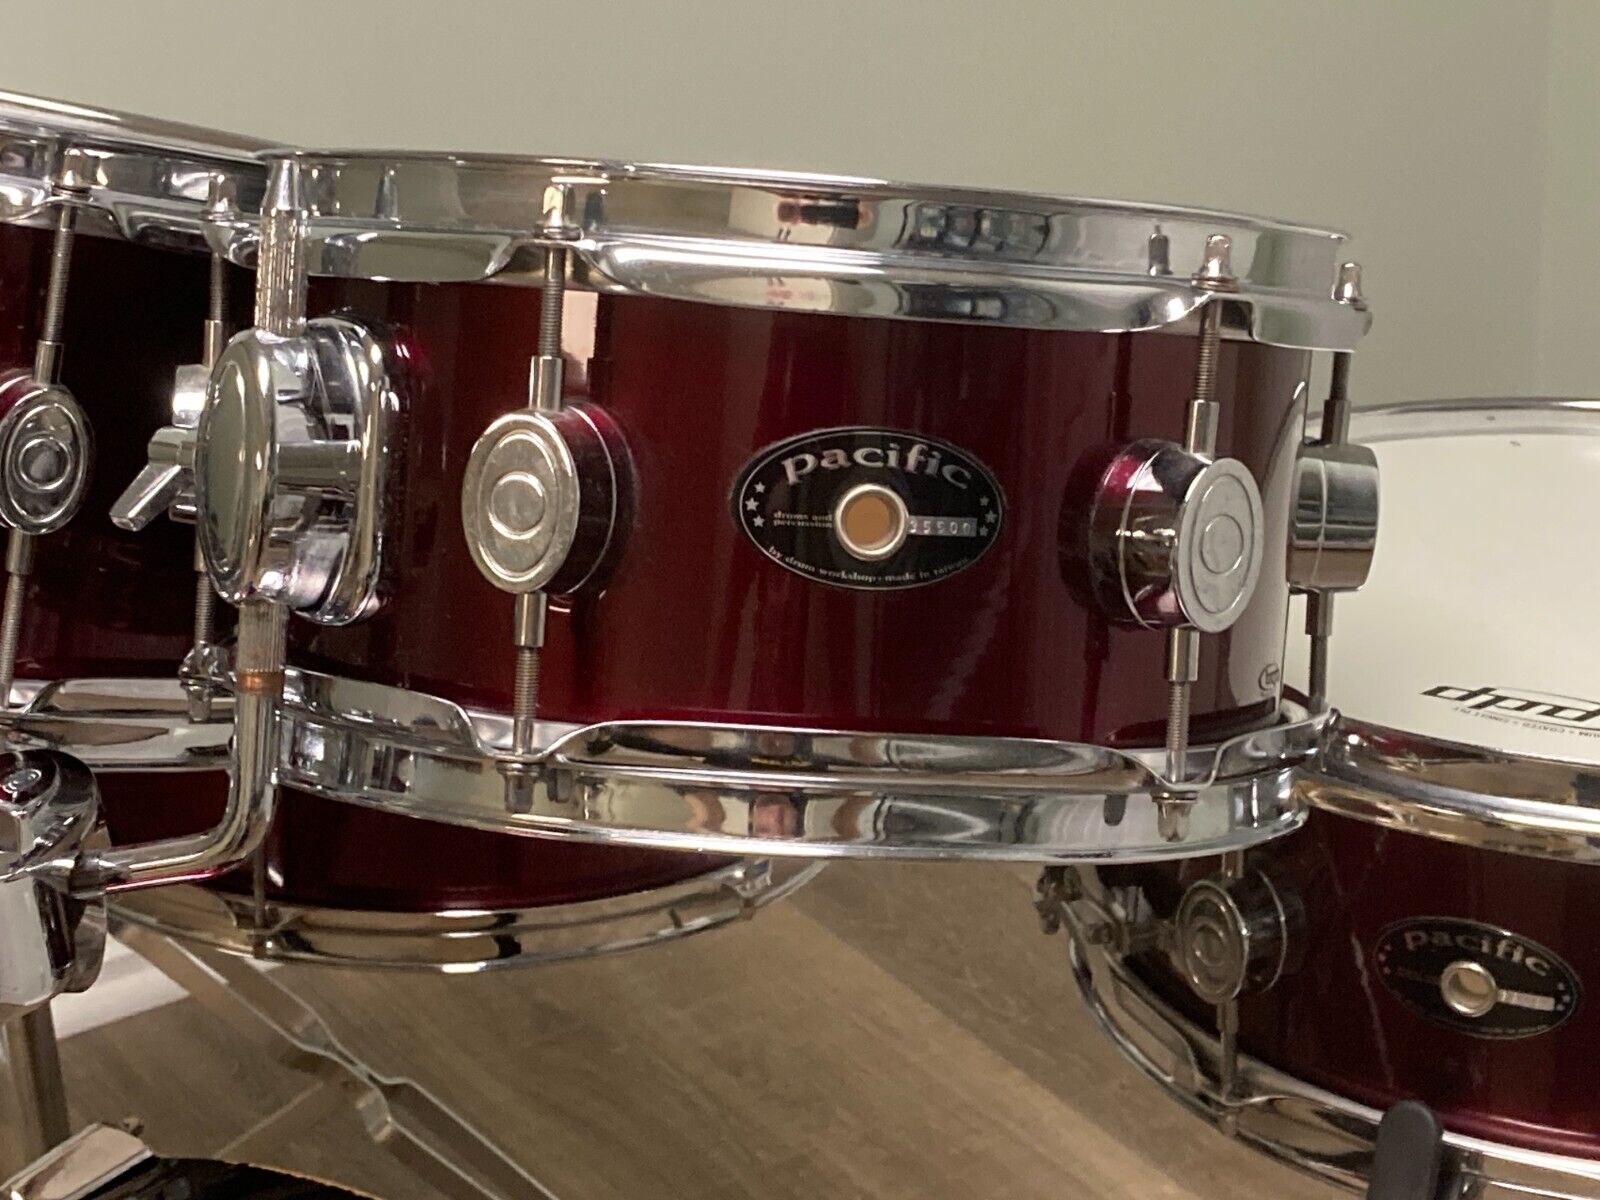 PDP by DW Pacific Chameleon Compact Travel Drum Set 2000s – Wine Red 9